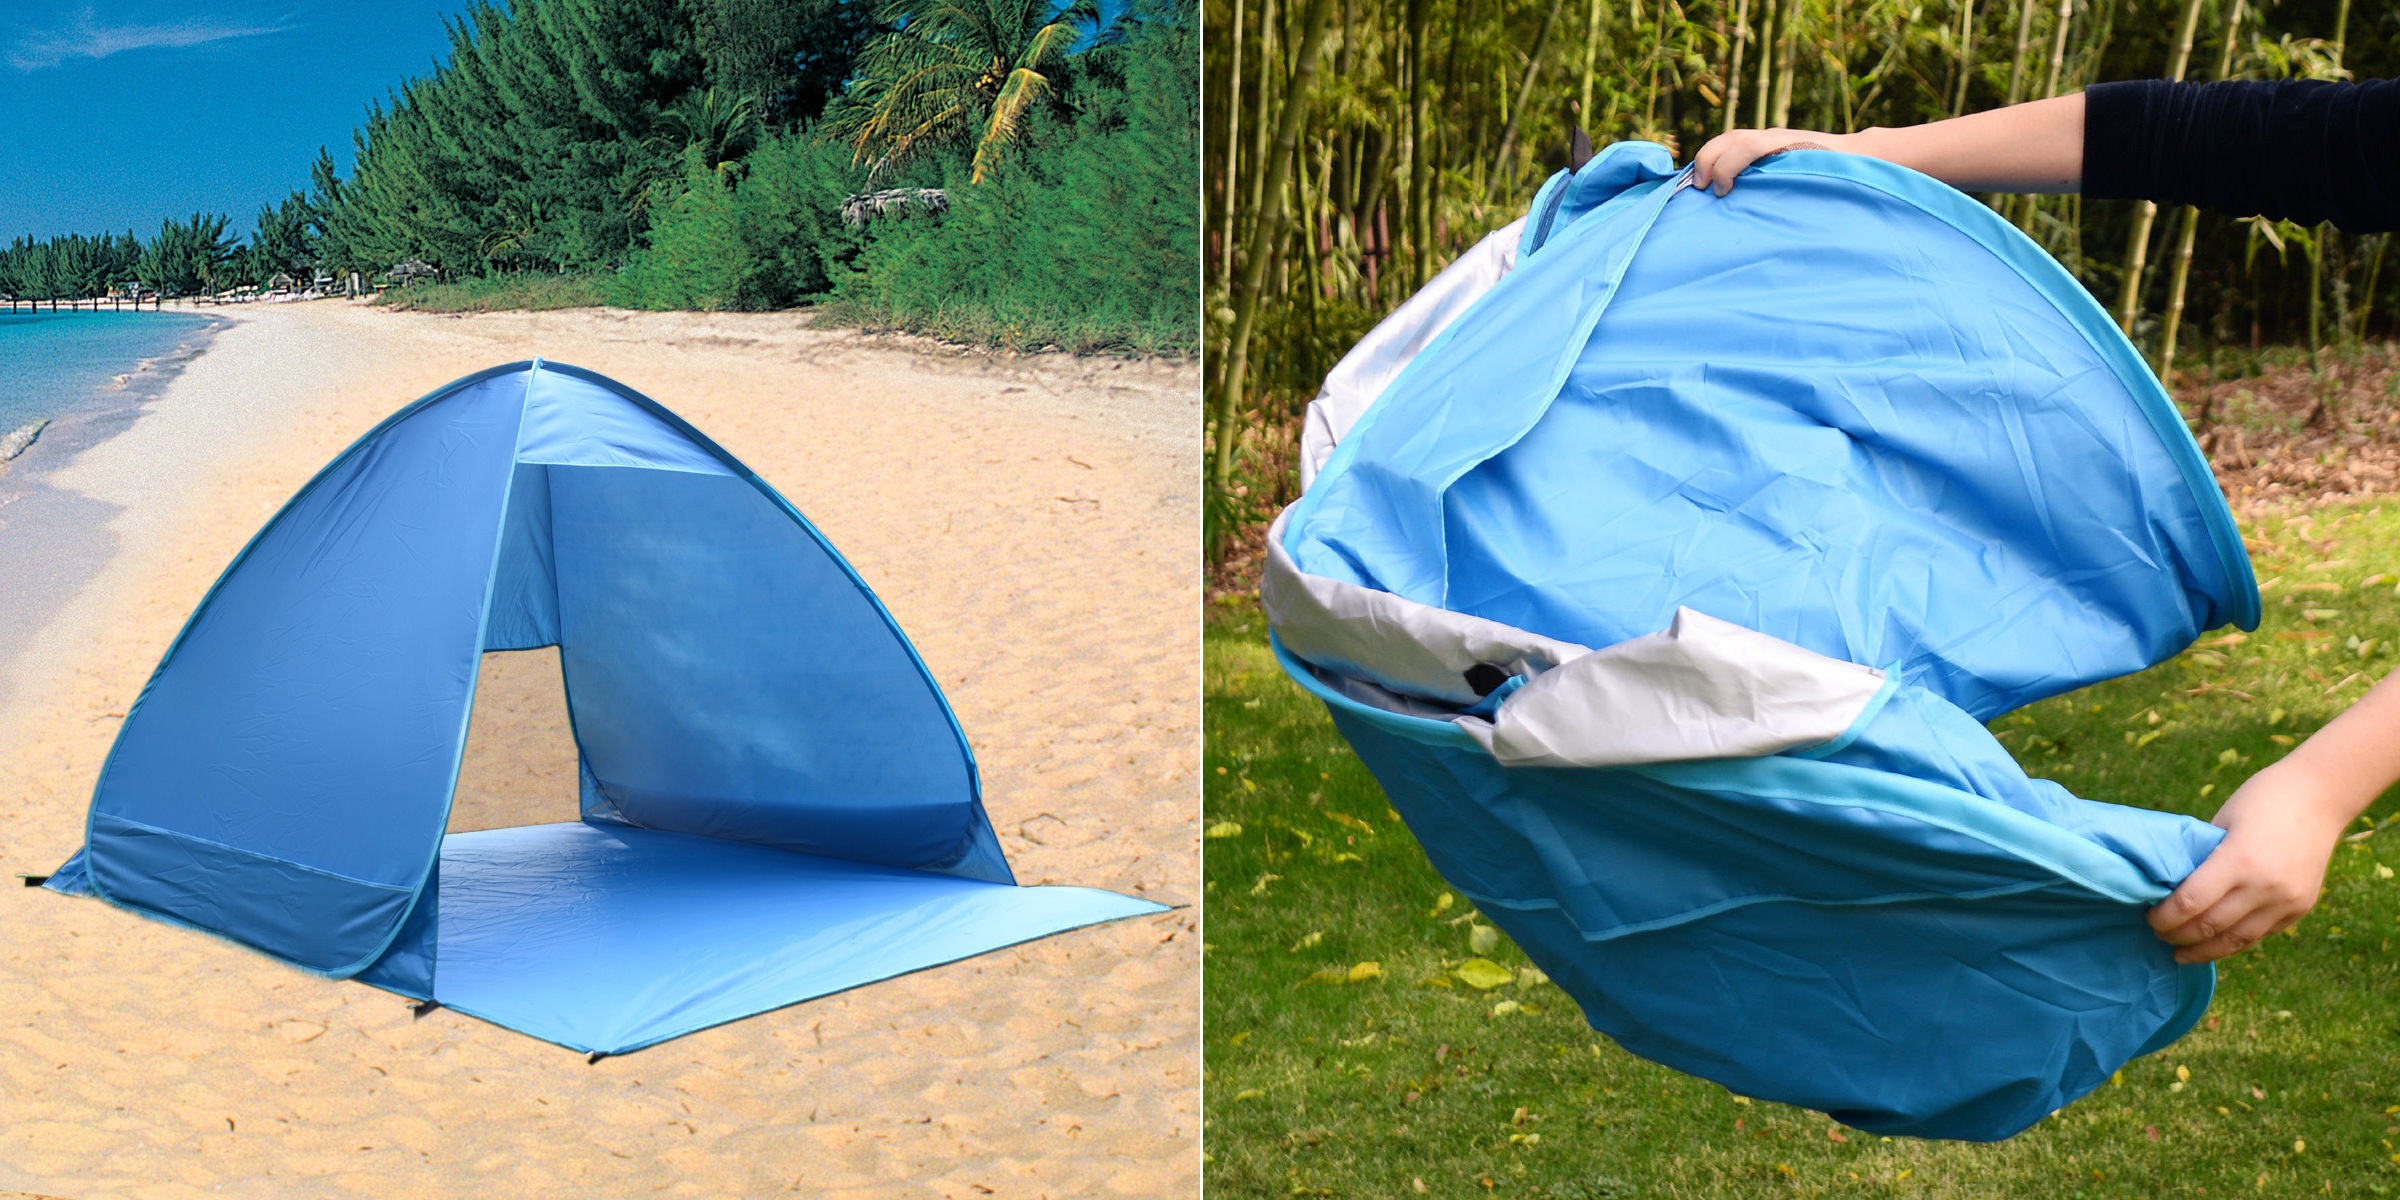 Portable Pop Up Shade Canopy Tent Only $14.49 SHIPPED!